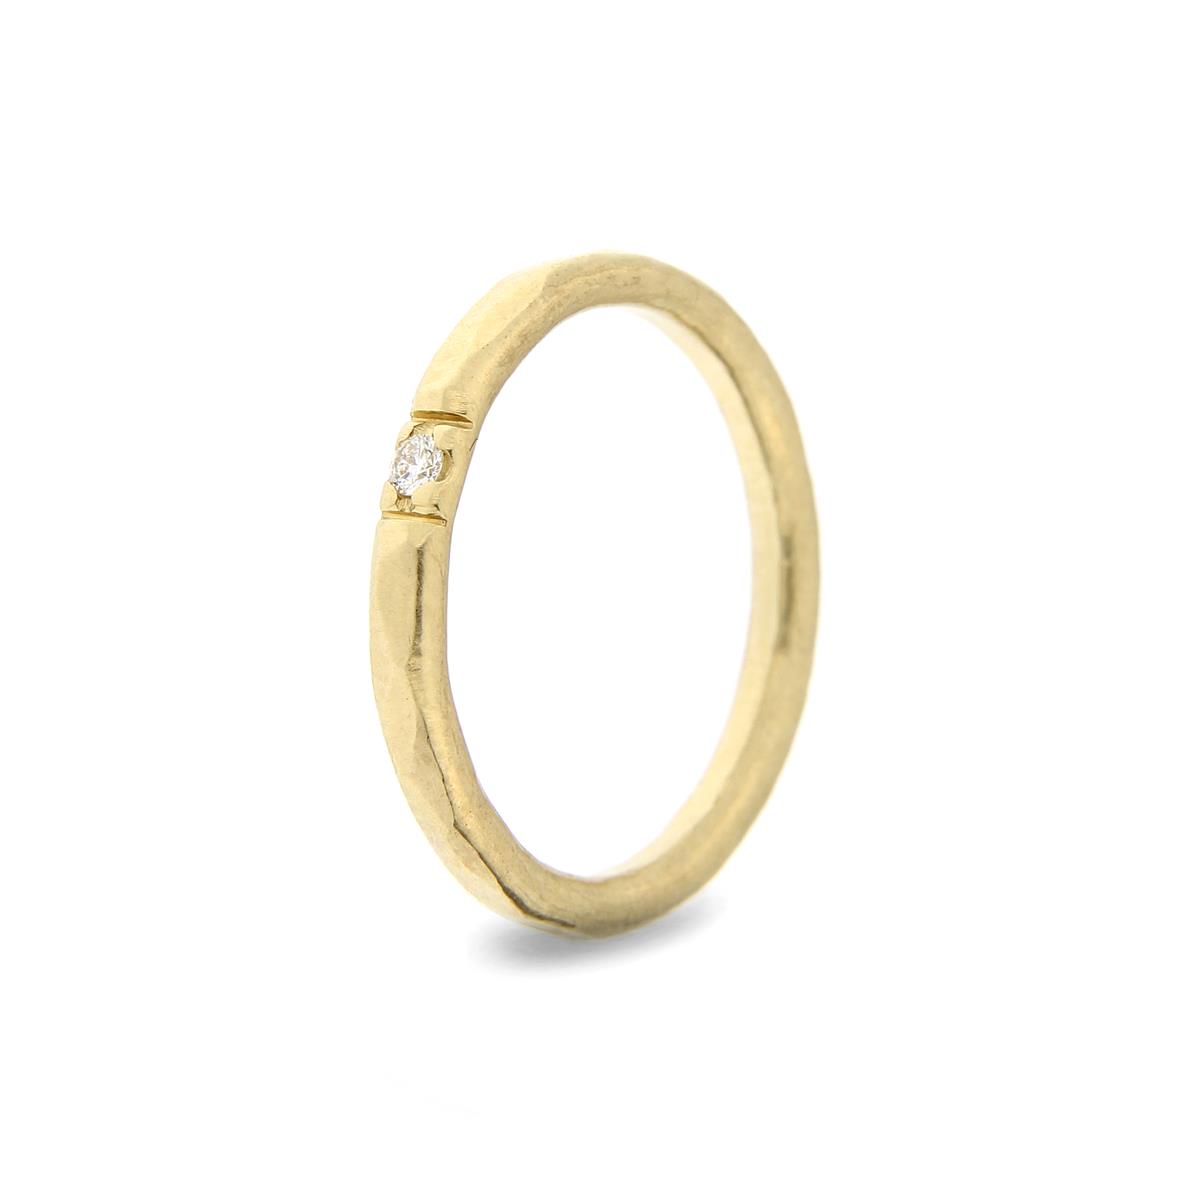 Katie g. Jewellery_Hammered Ring 2,0mm - 14kt. Champagnergold + 1 Brillant